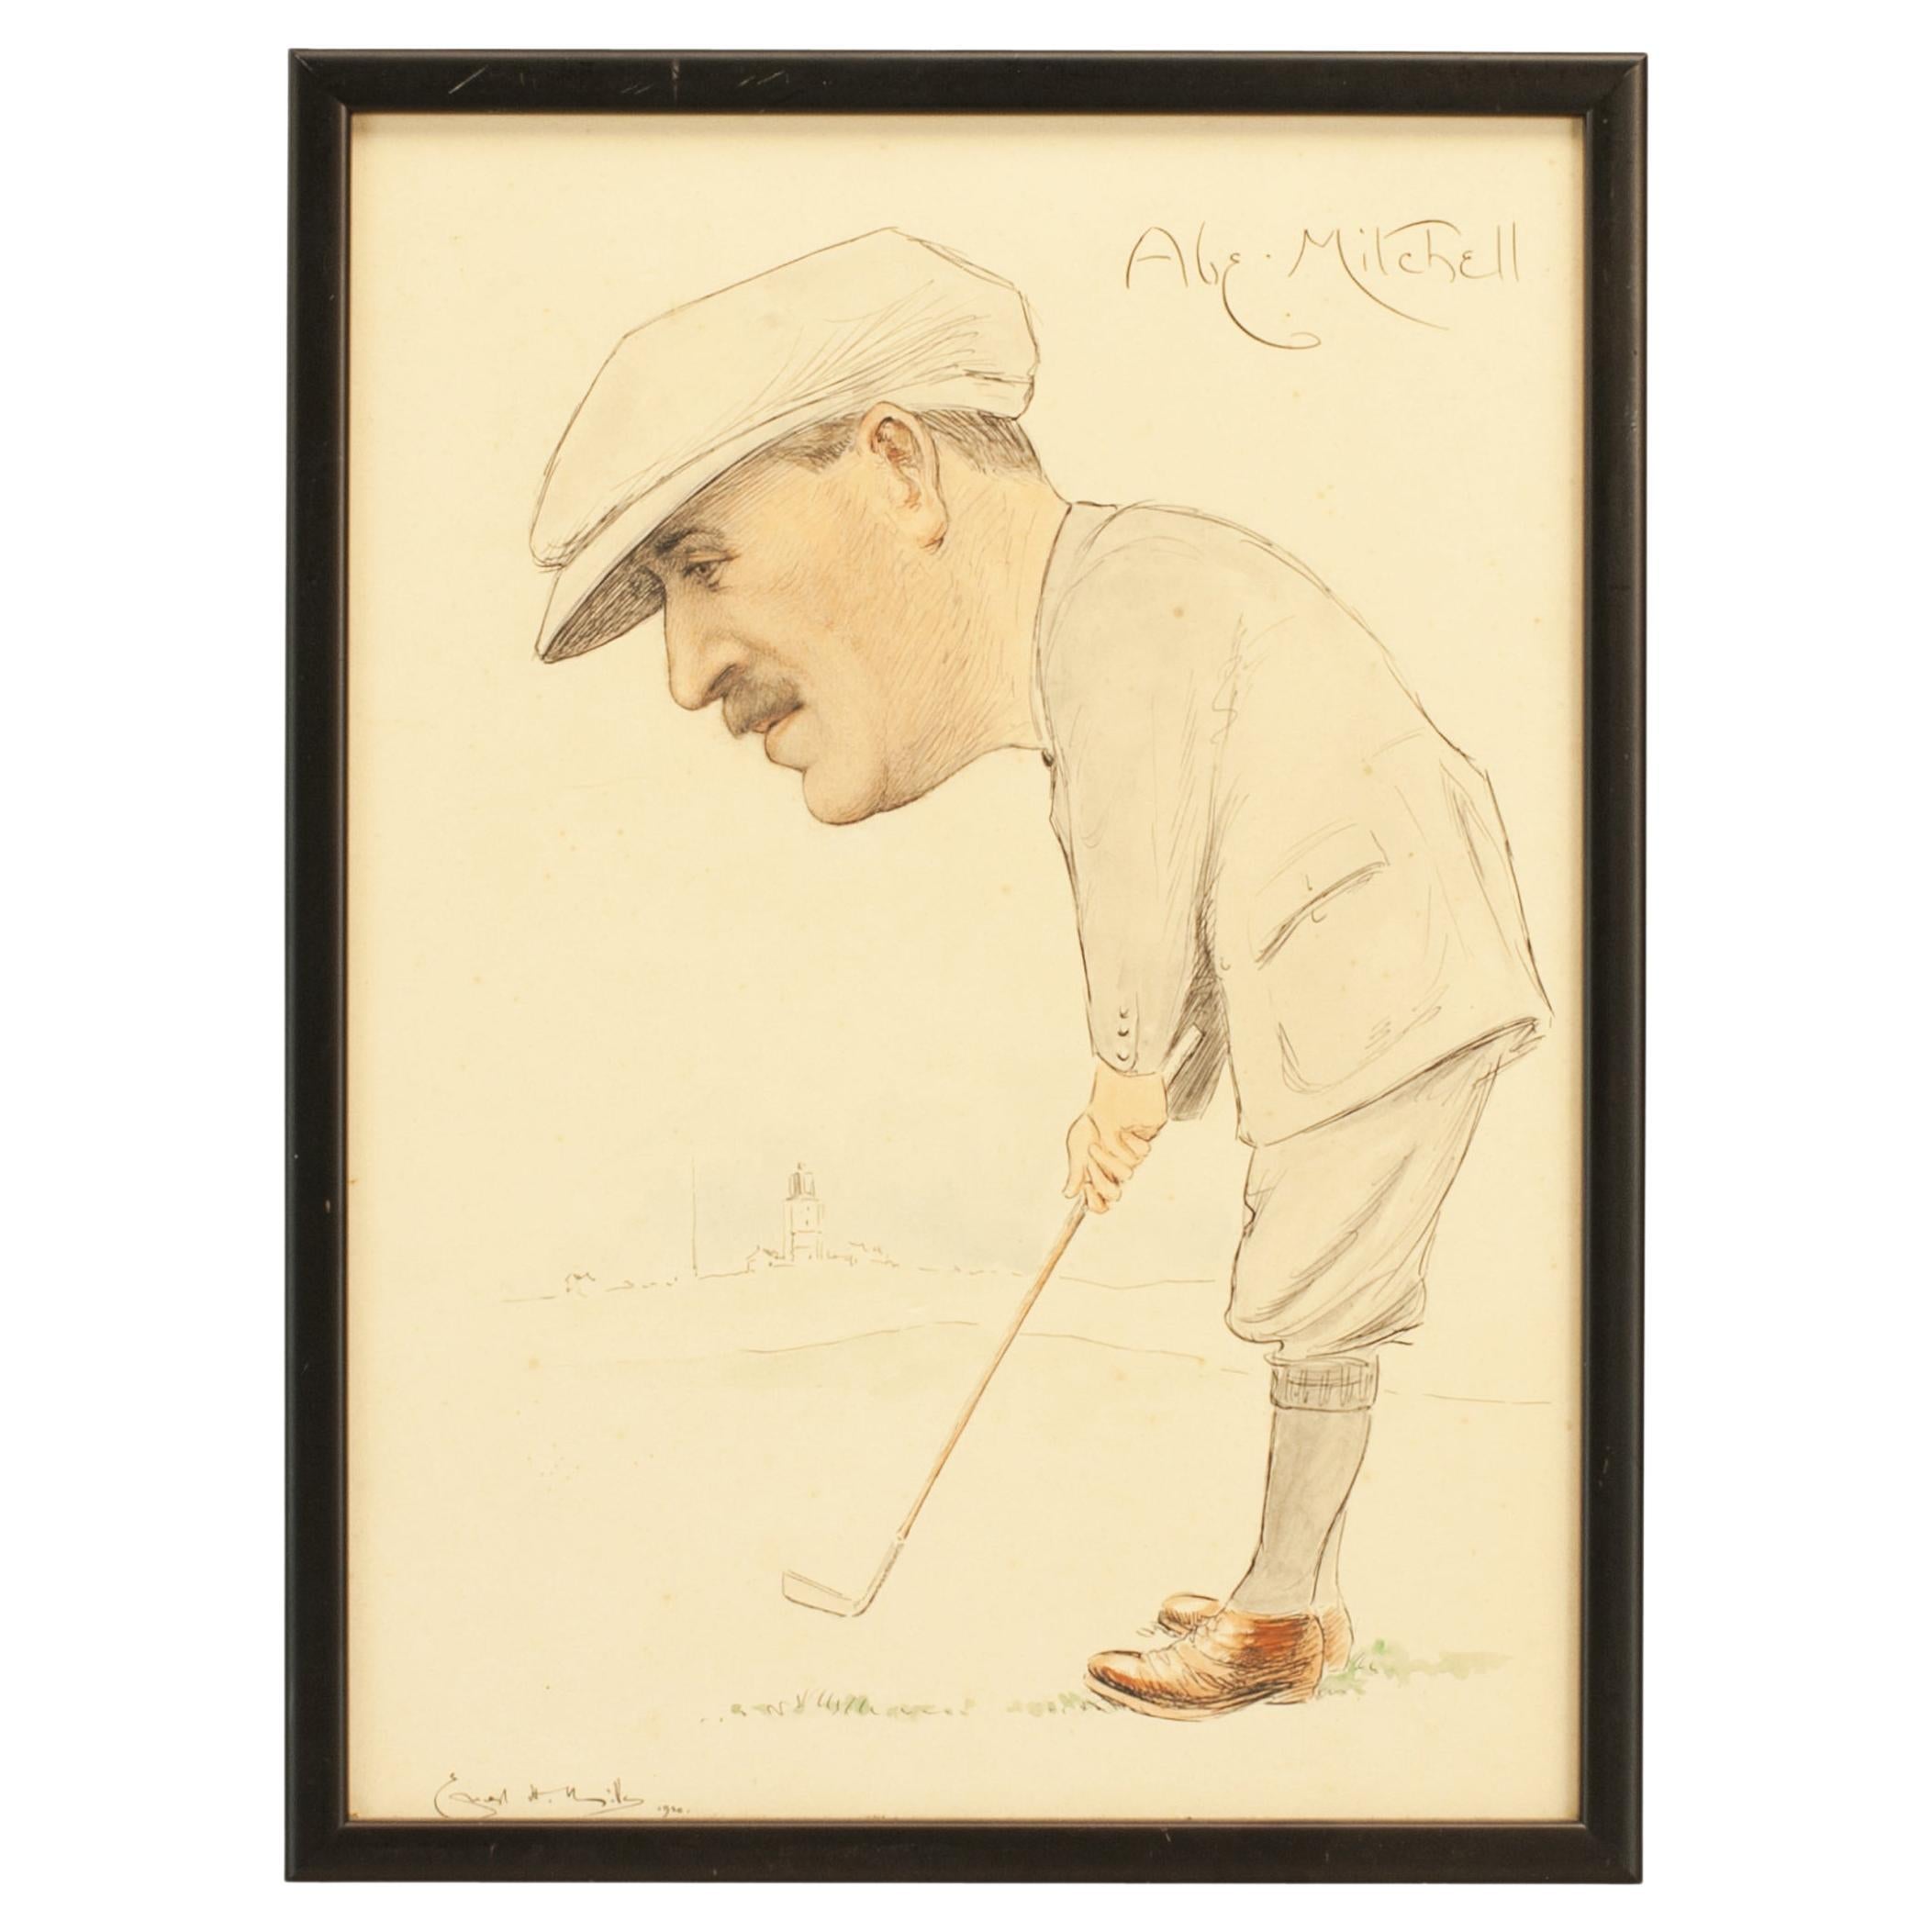 Vintage Golf Picture Of Abe Mitchell, Watercolour Painting. For Sale